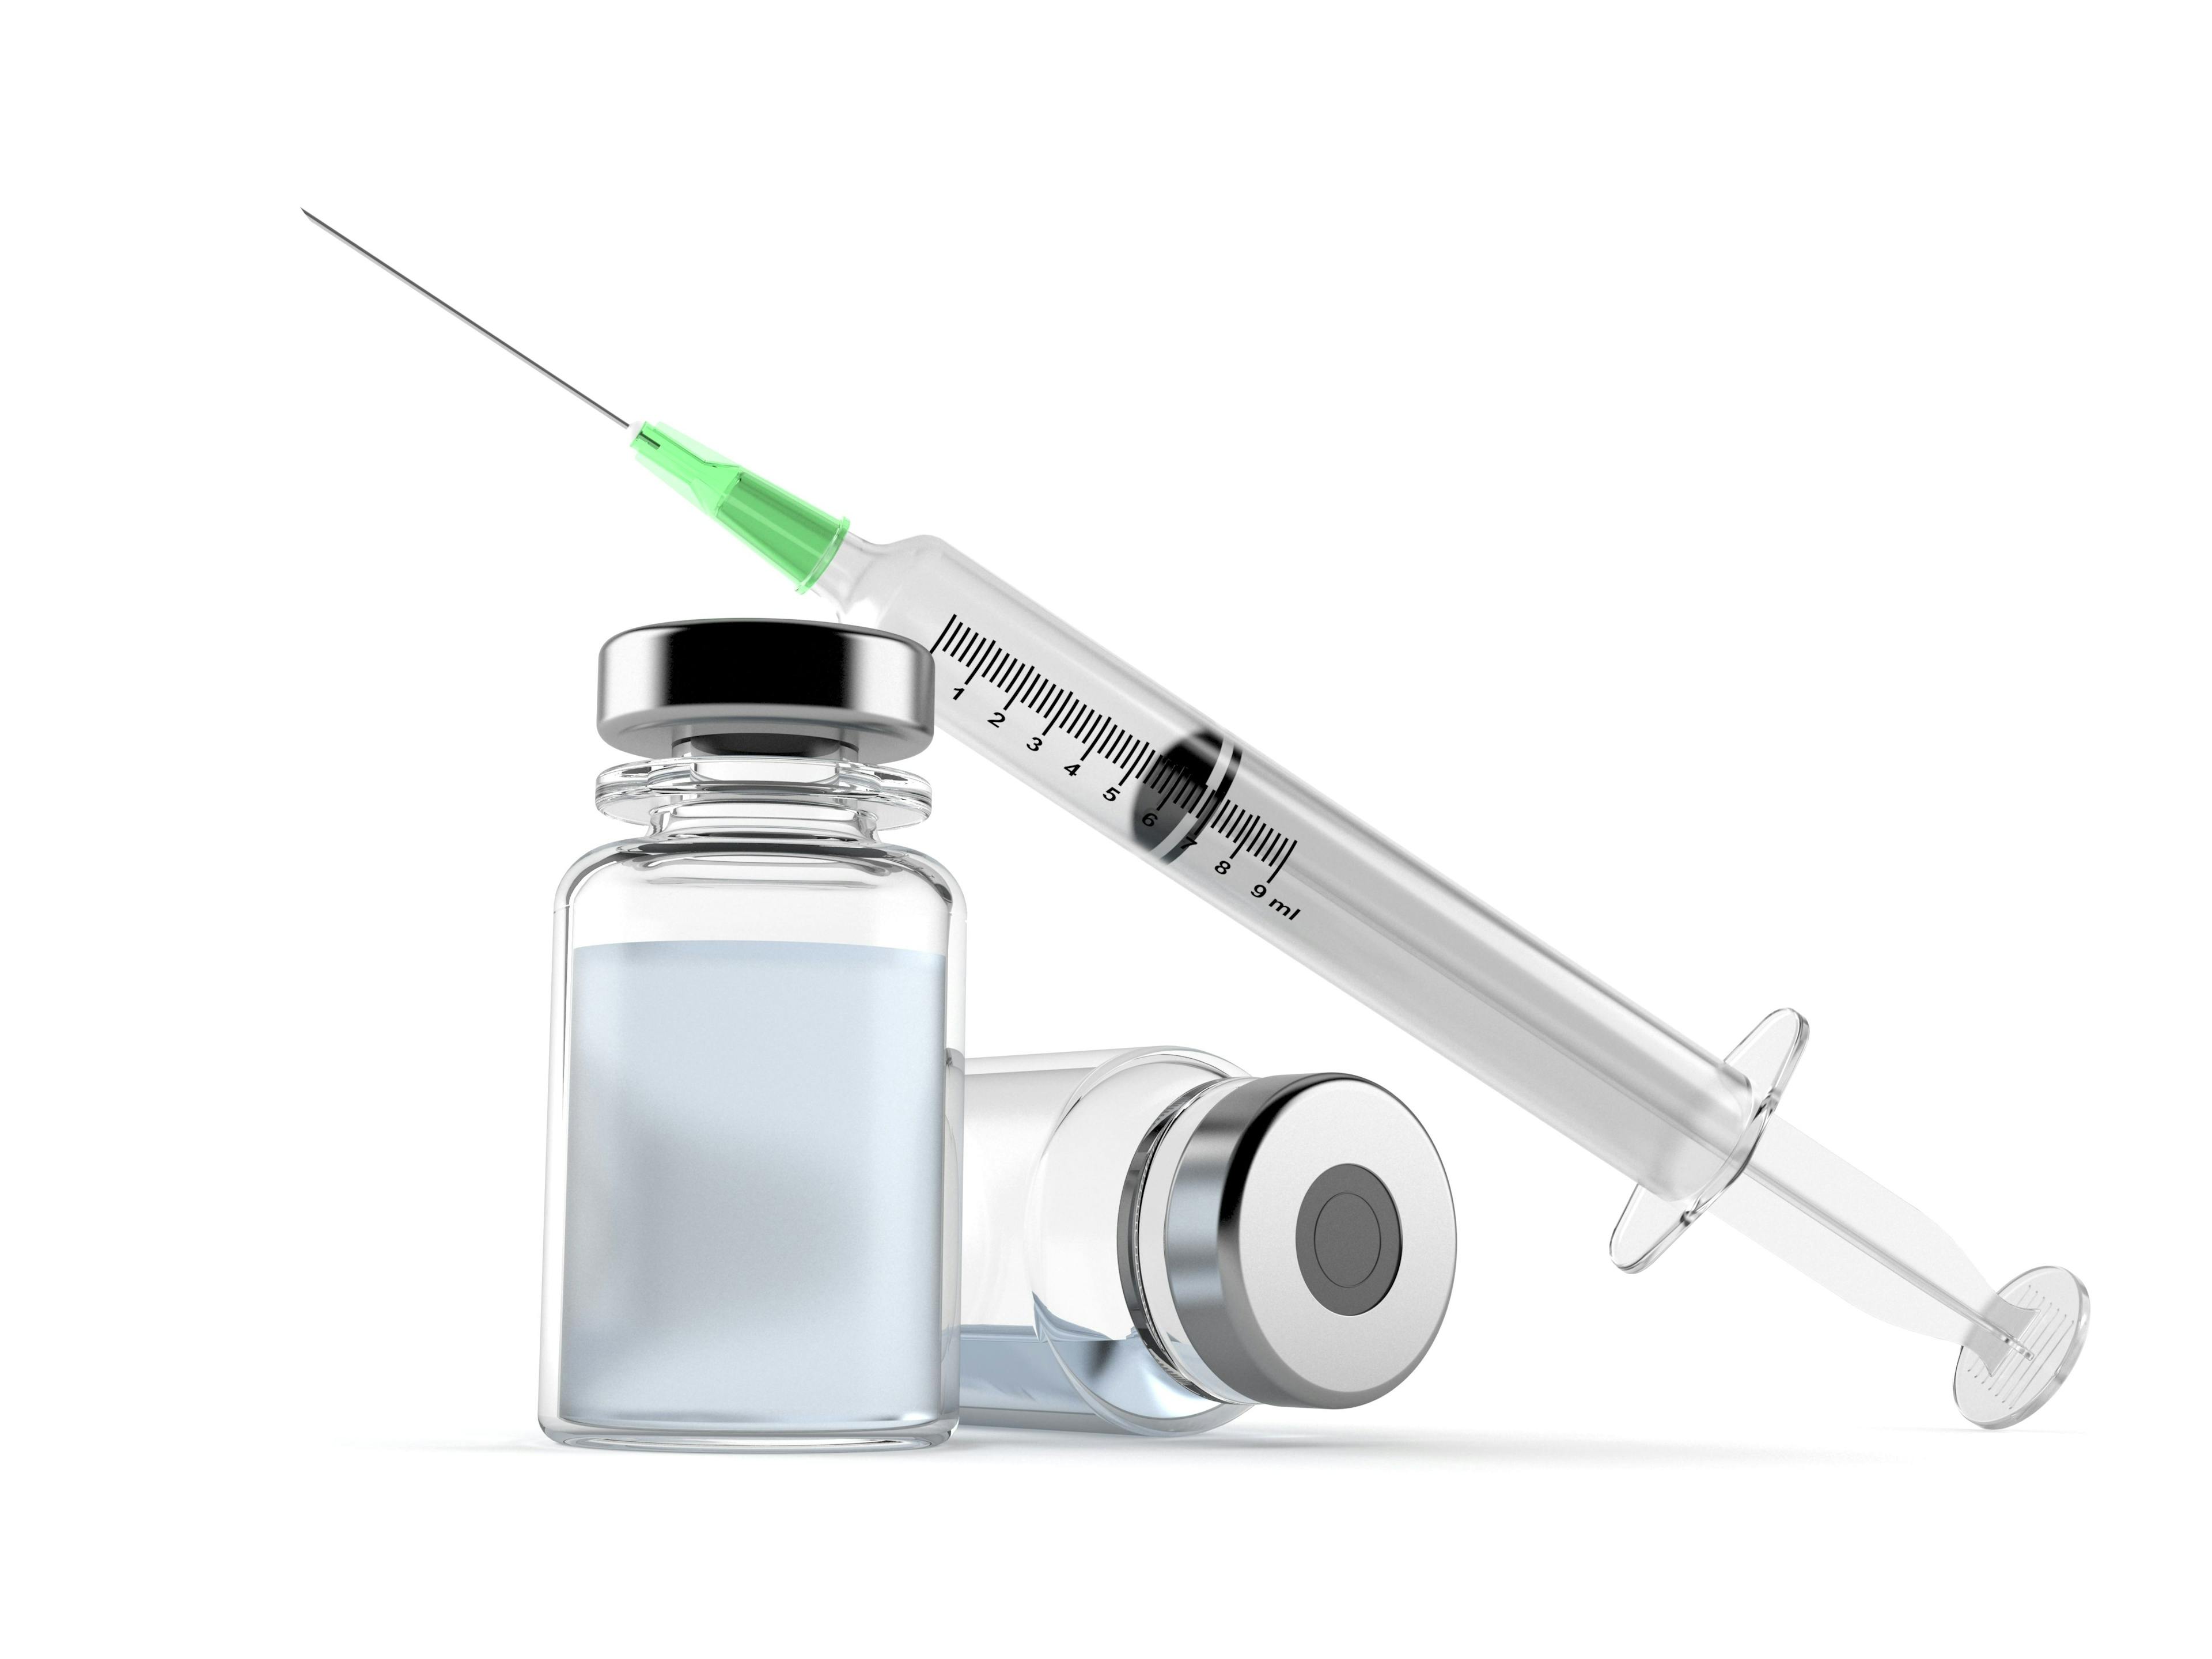 Study Finds Second COVID-19 Vaccine Dose is Safe Following Allergic Reaction to First Dose